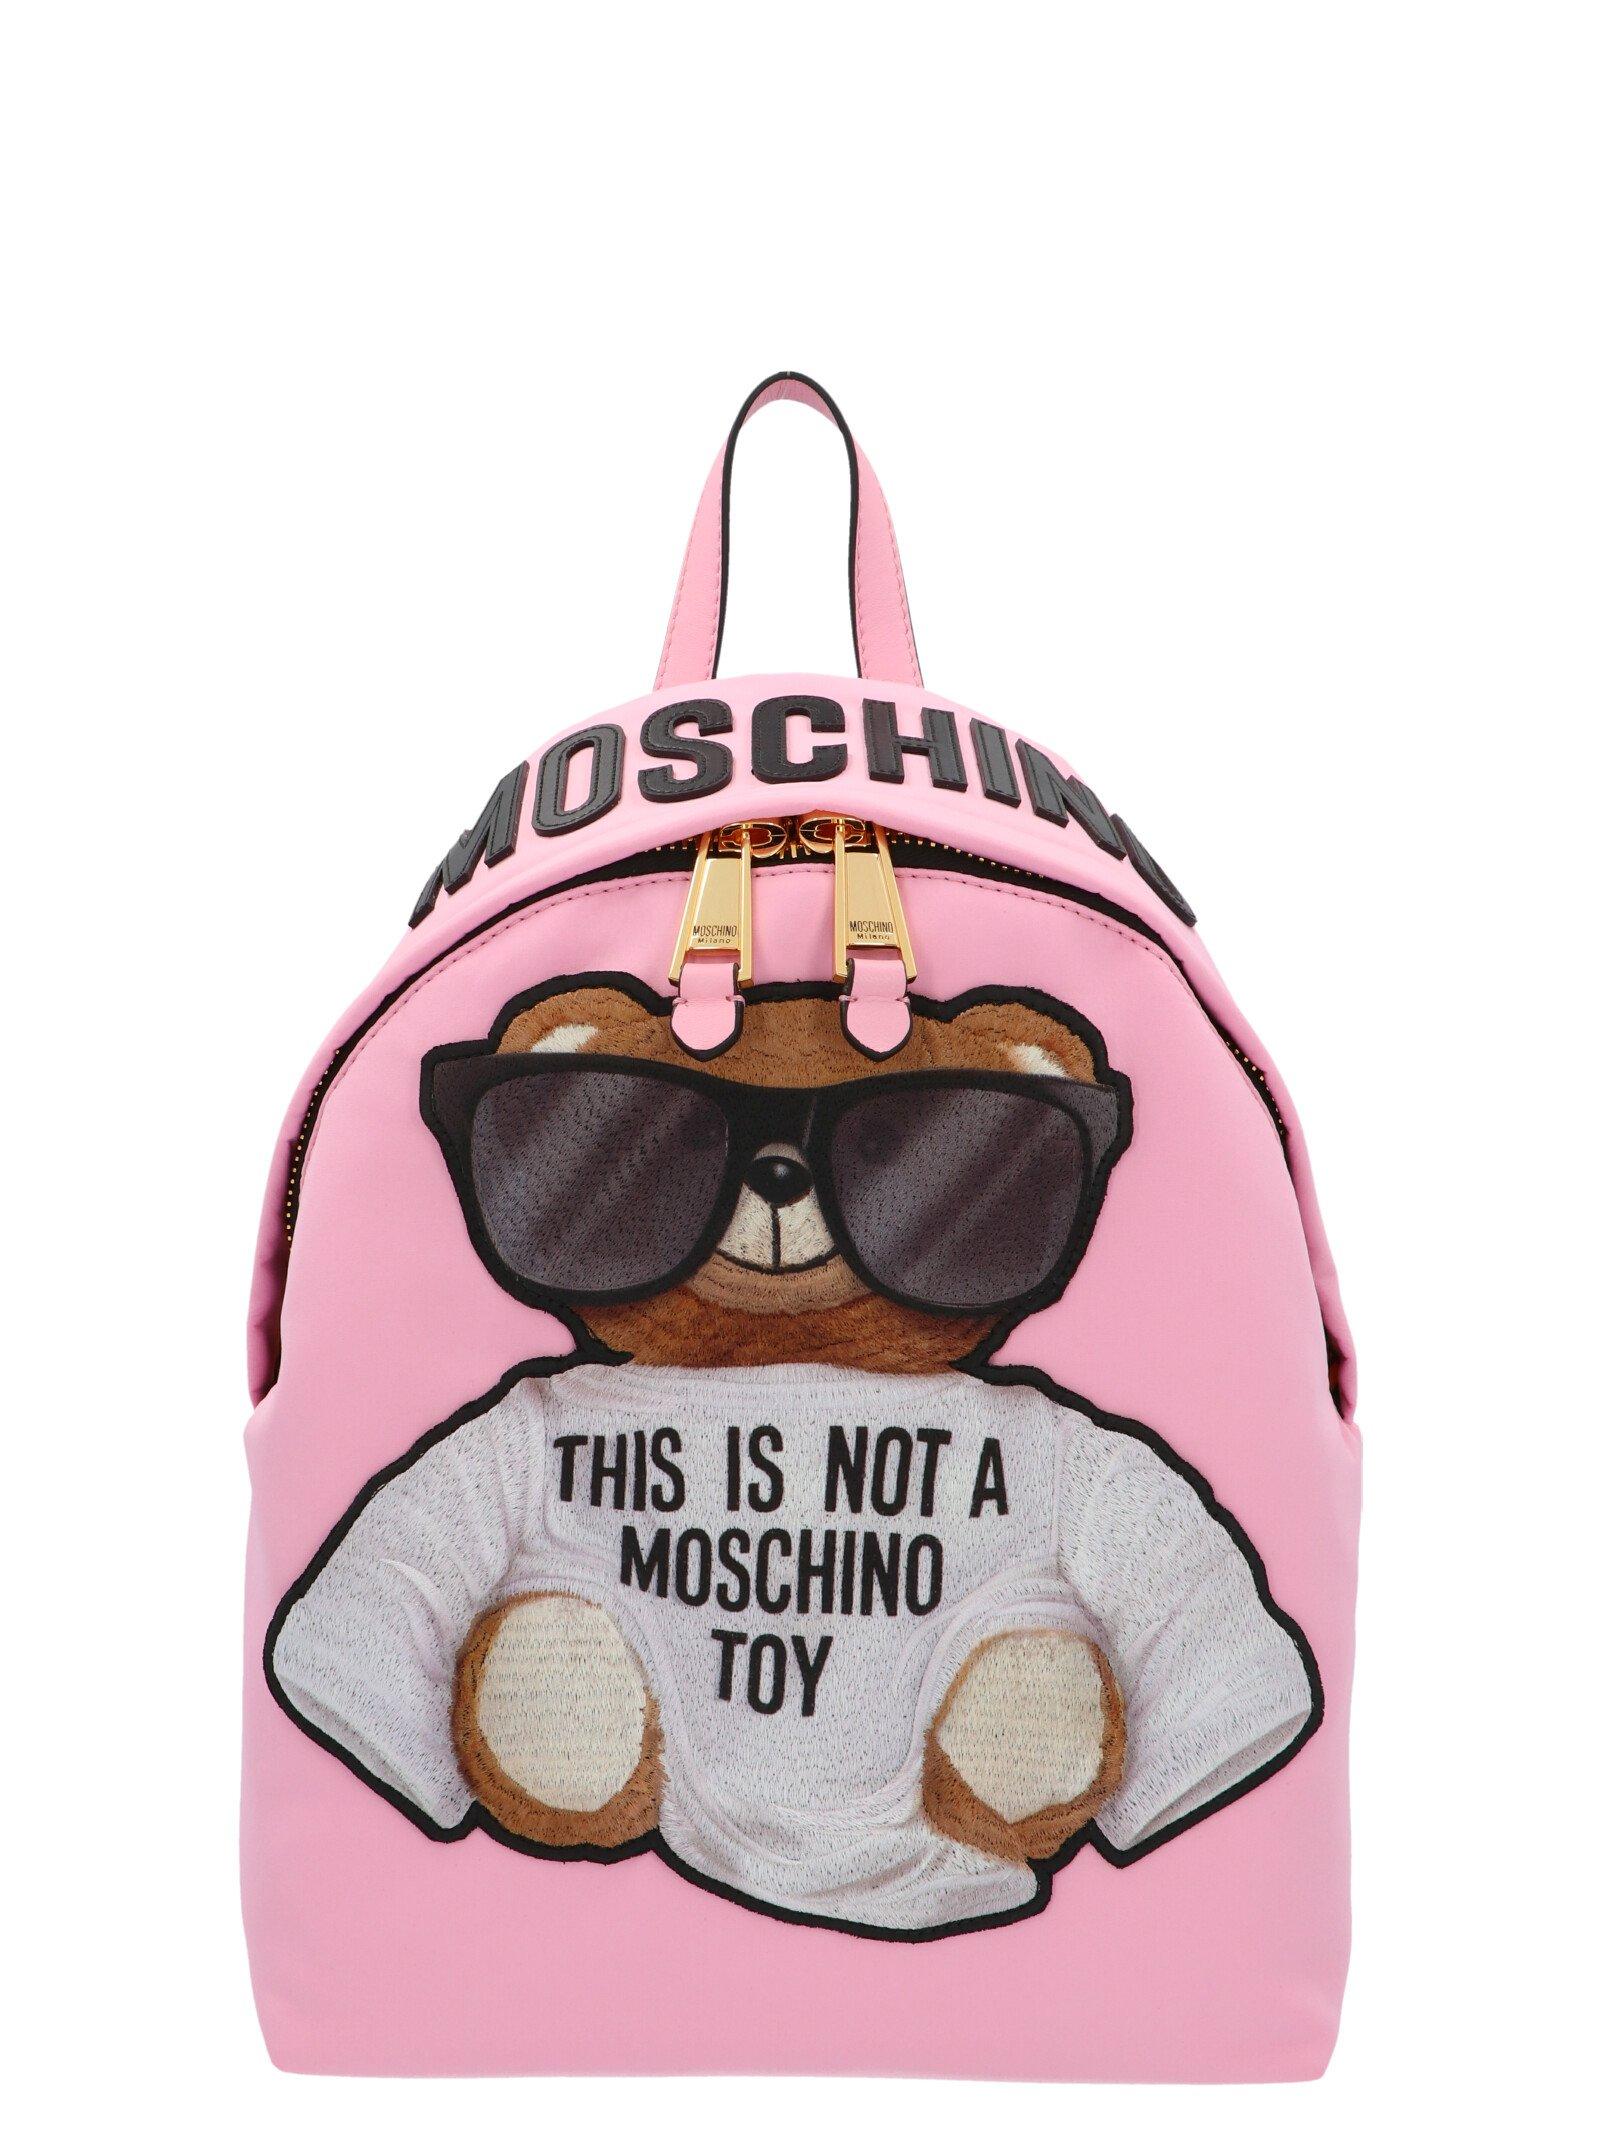 Moschino Synthetic Teddy Backpack in Pink - Lyst